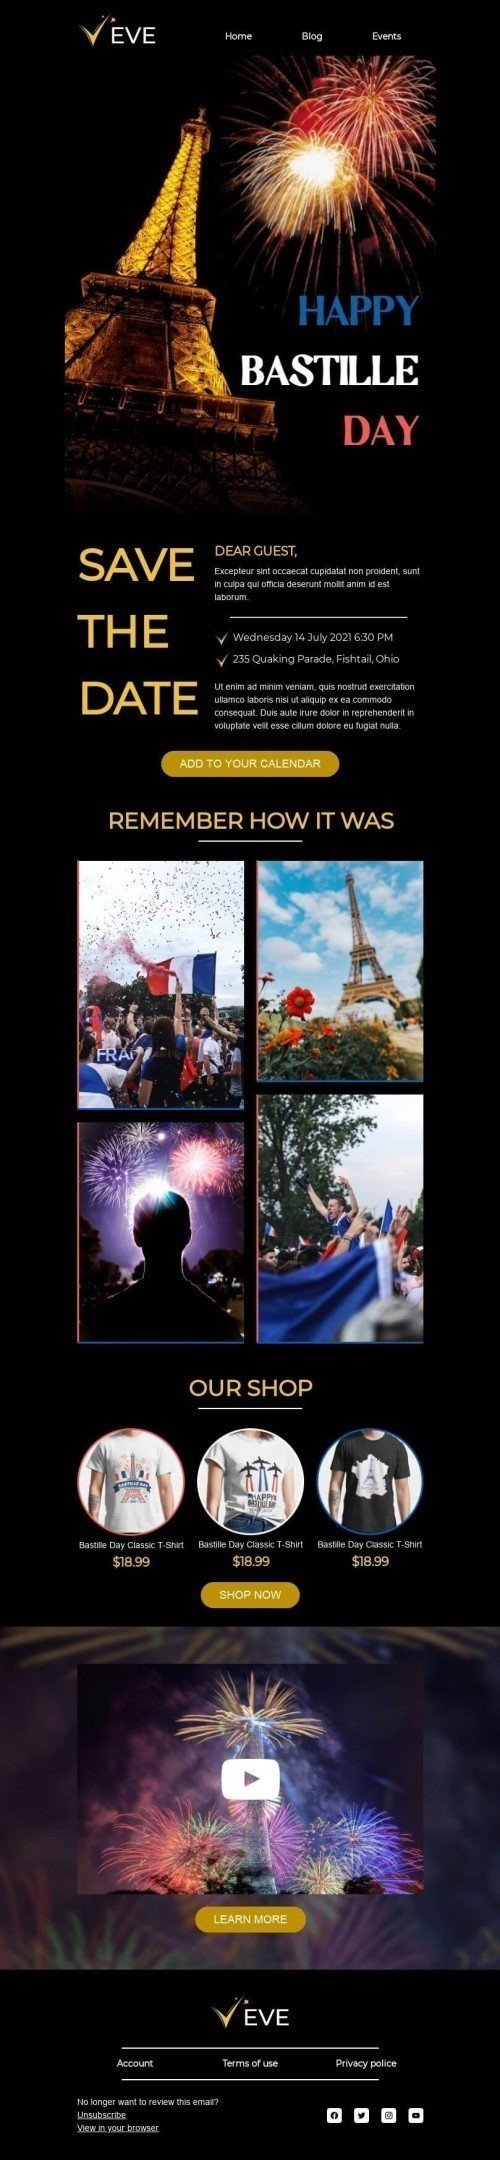 Bastille Day Email Template "Dear Guest" for Hobbies industry mobile view